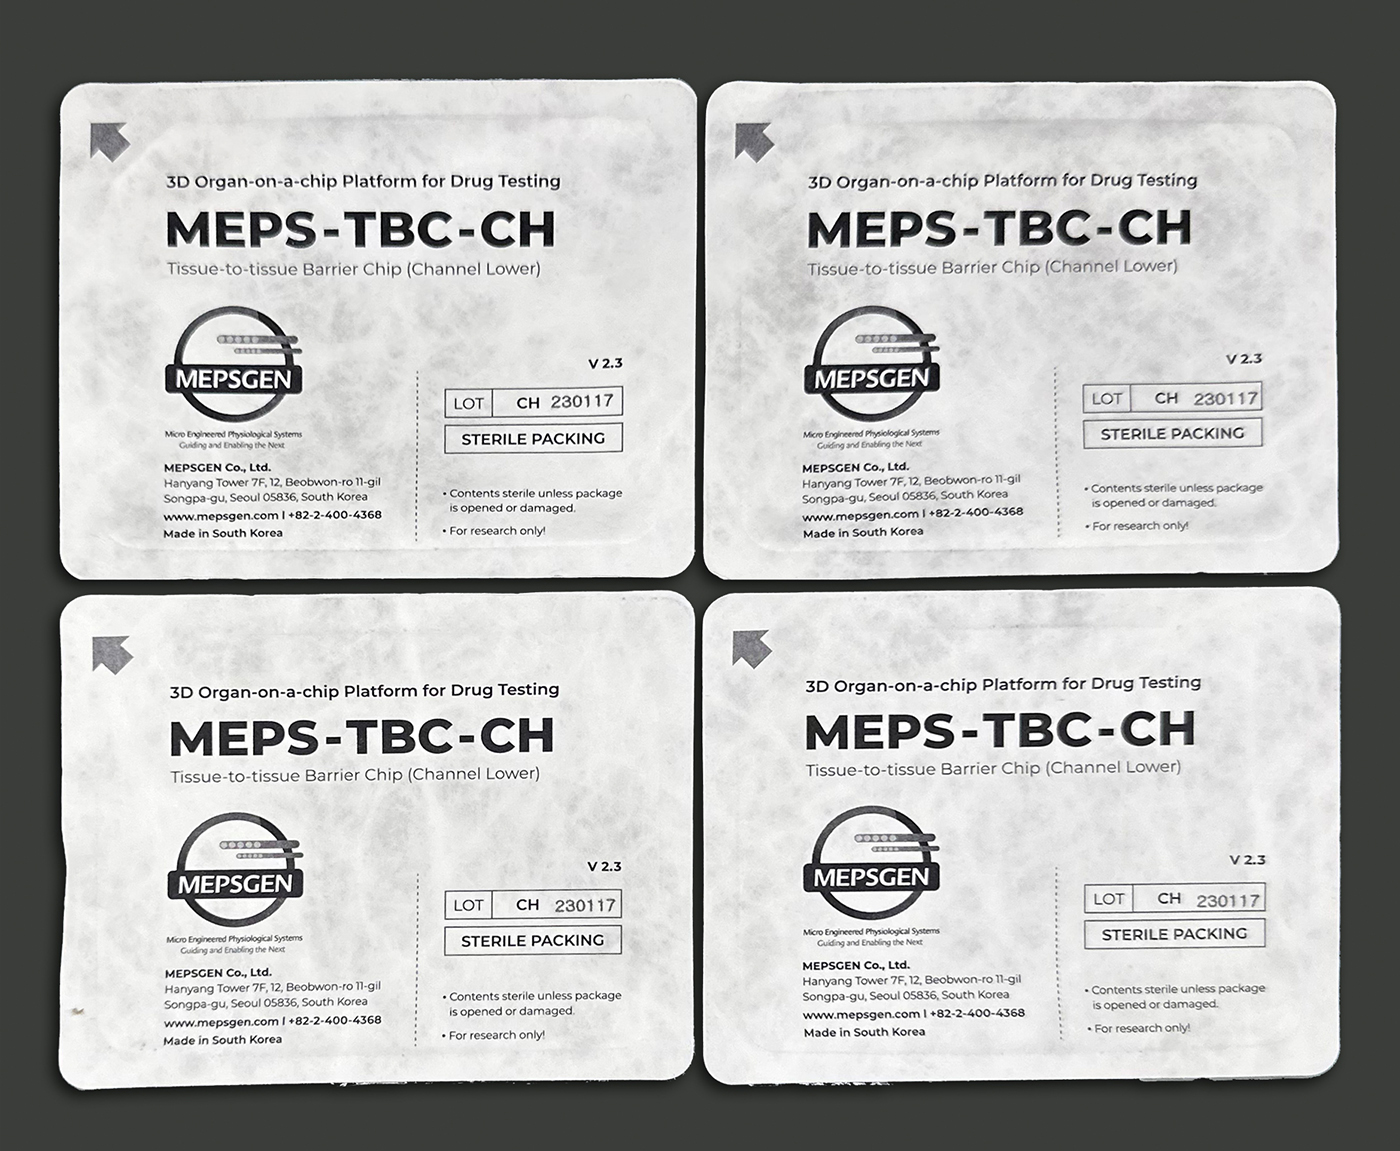 Picture of the label of MESPGEN TBC-CH platforms